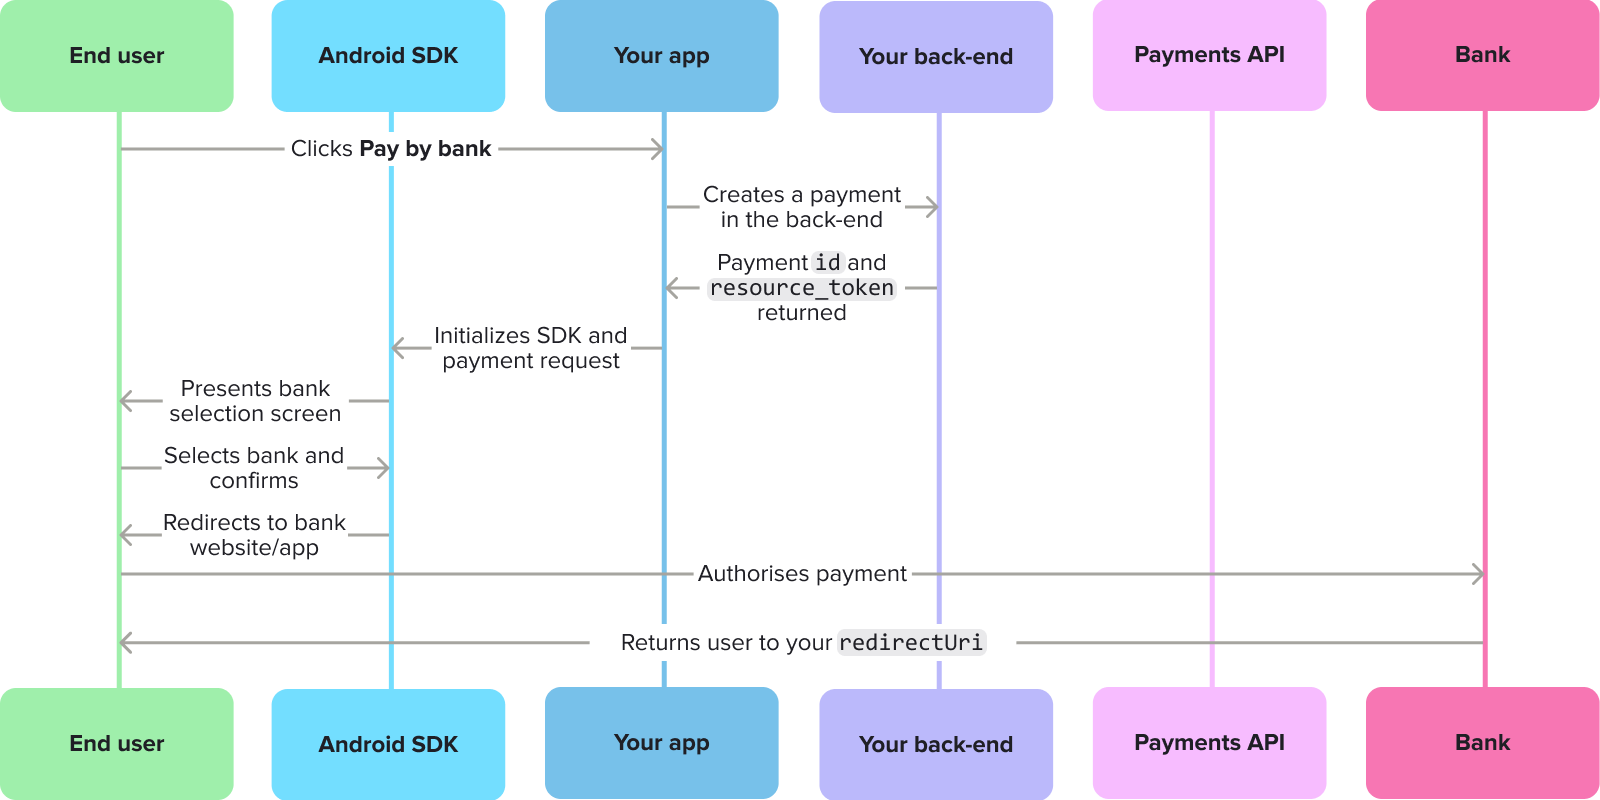 The payment journey with an Android SDK integration.